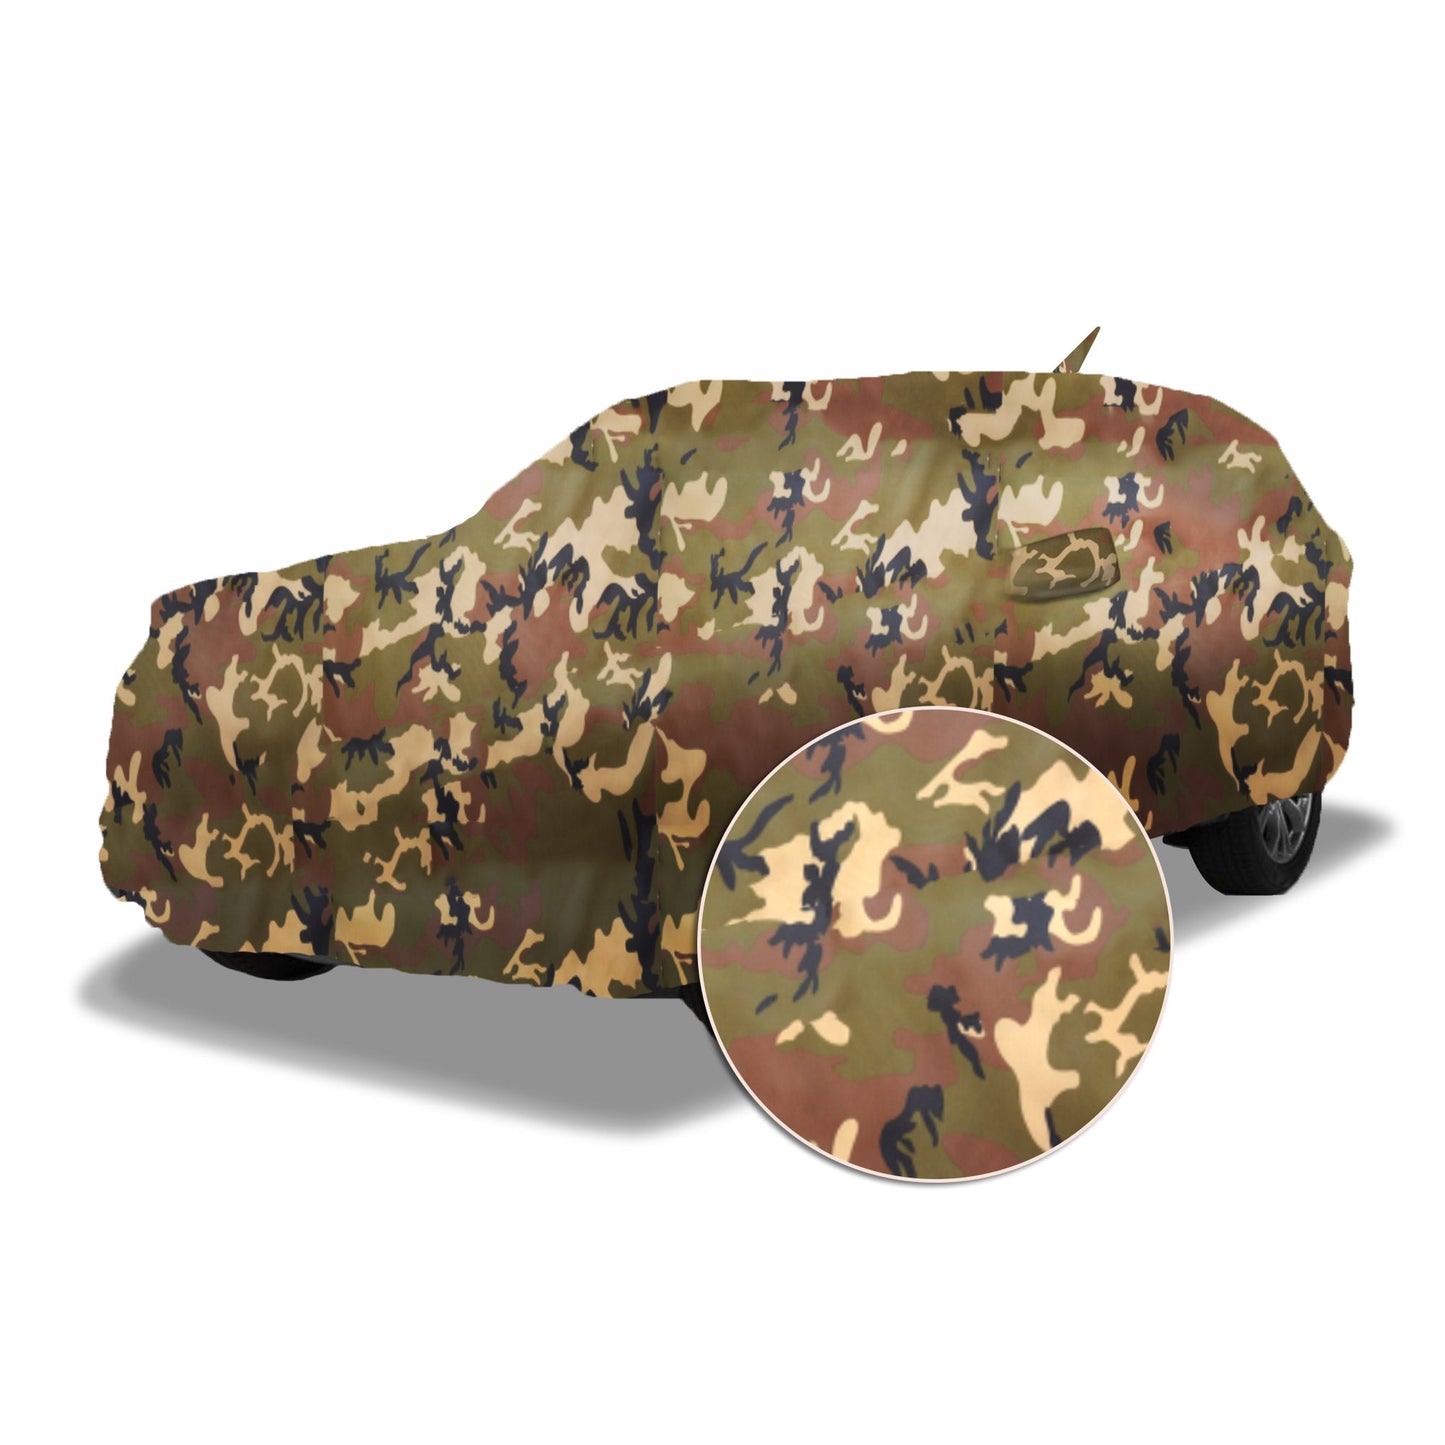 Ascot Kia Carnival Car Body Cover Extra Strong & Dust Proof Jungle Military Car Cover with UV Proof & Water-Resistant Coating